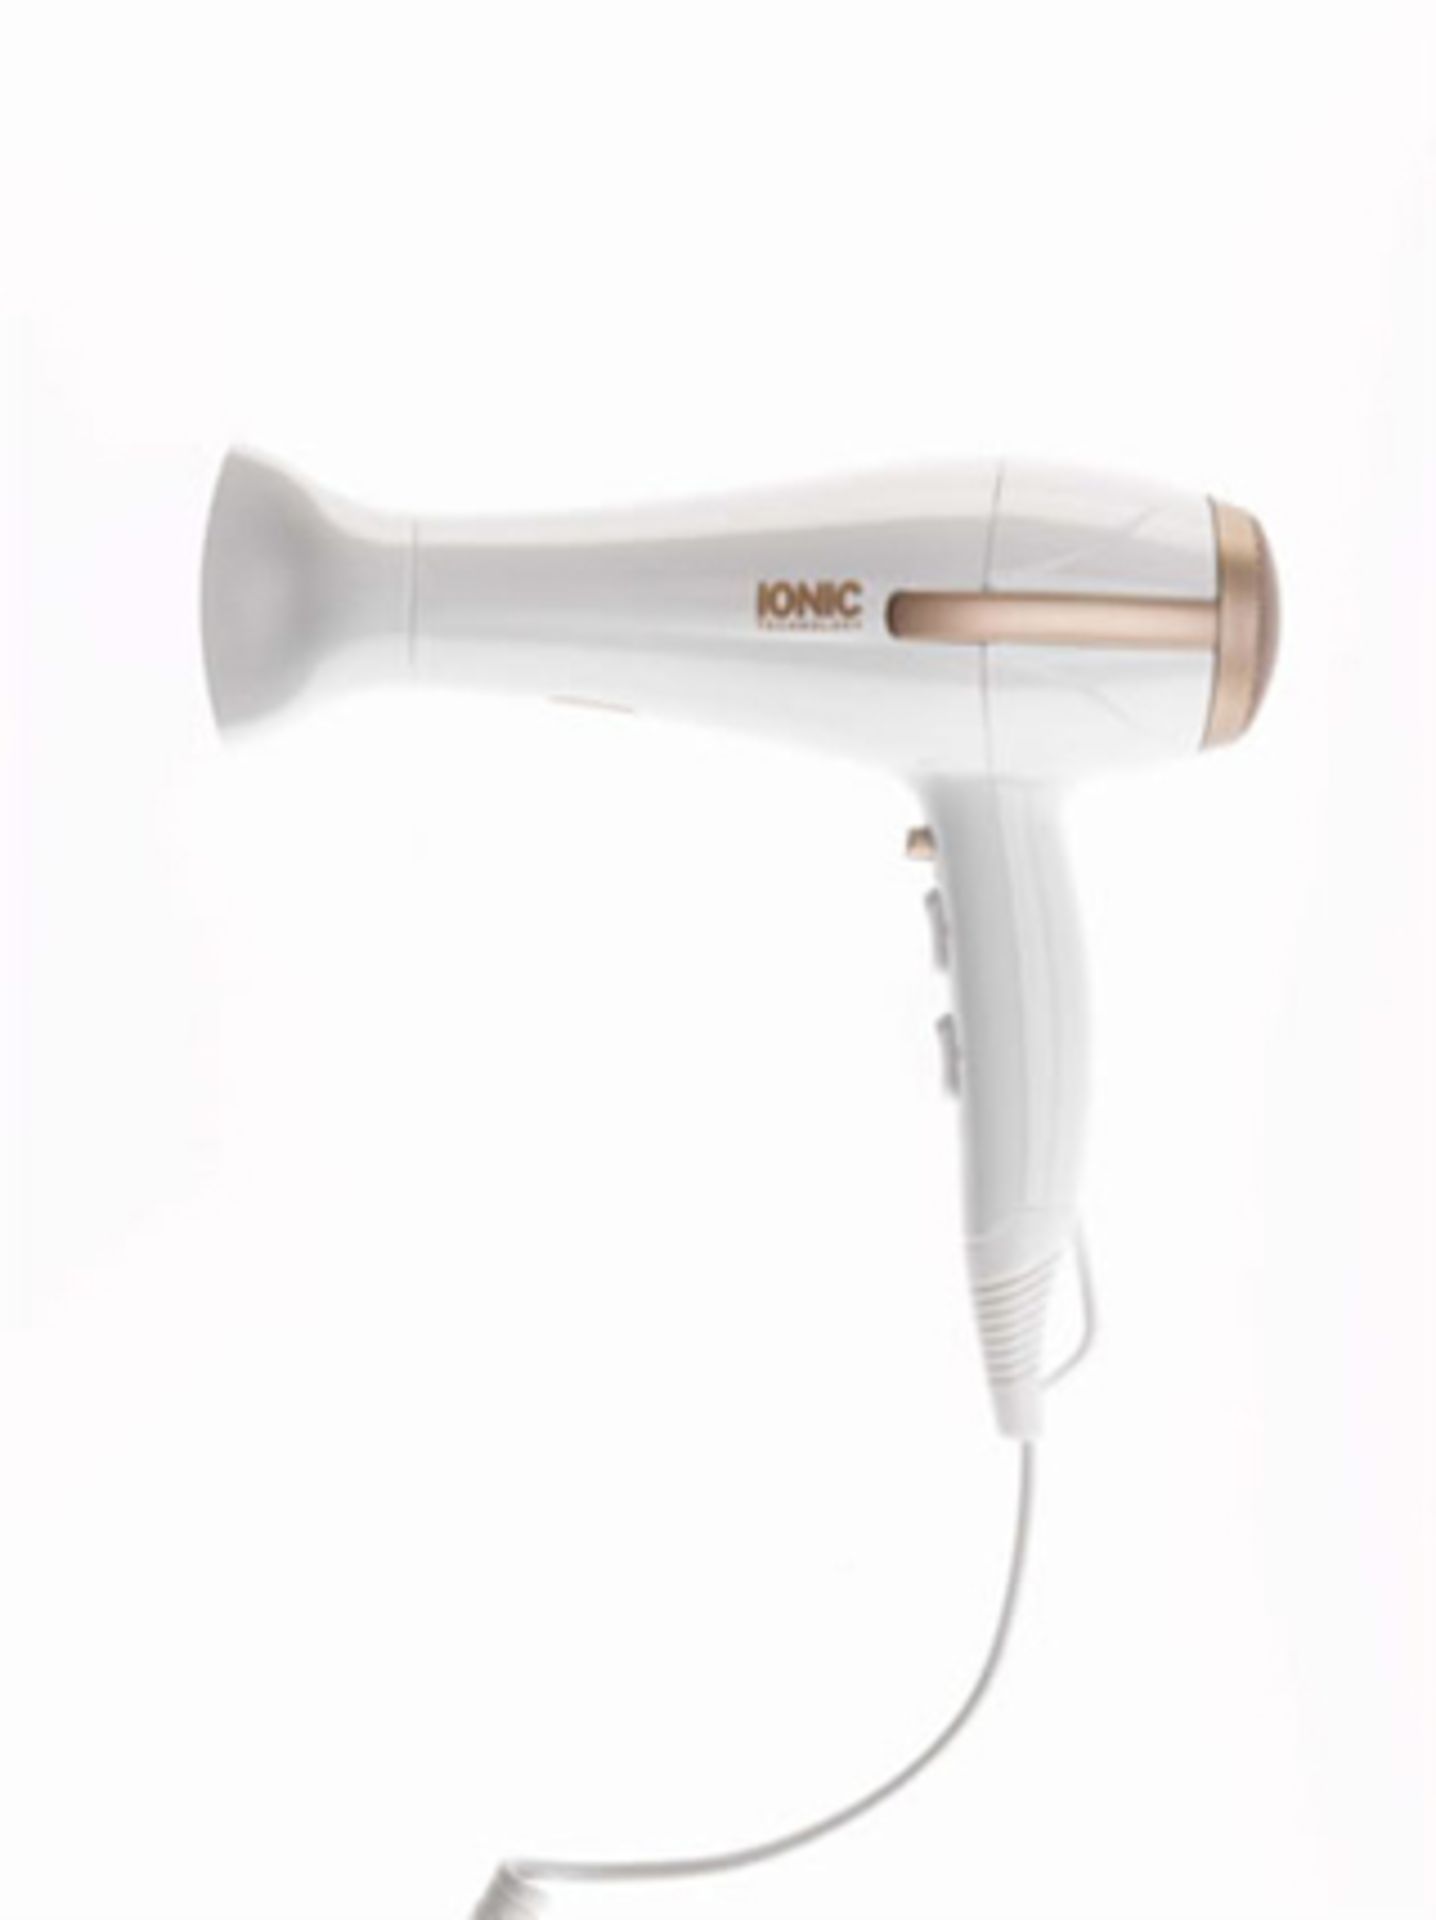 V Brand New Easy Home Ionic Hairdryer-3 Temperature Levels-Directional & Removable Styling Nozzle- - Image 2 of 3